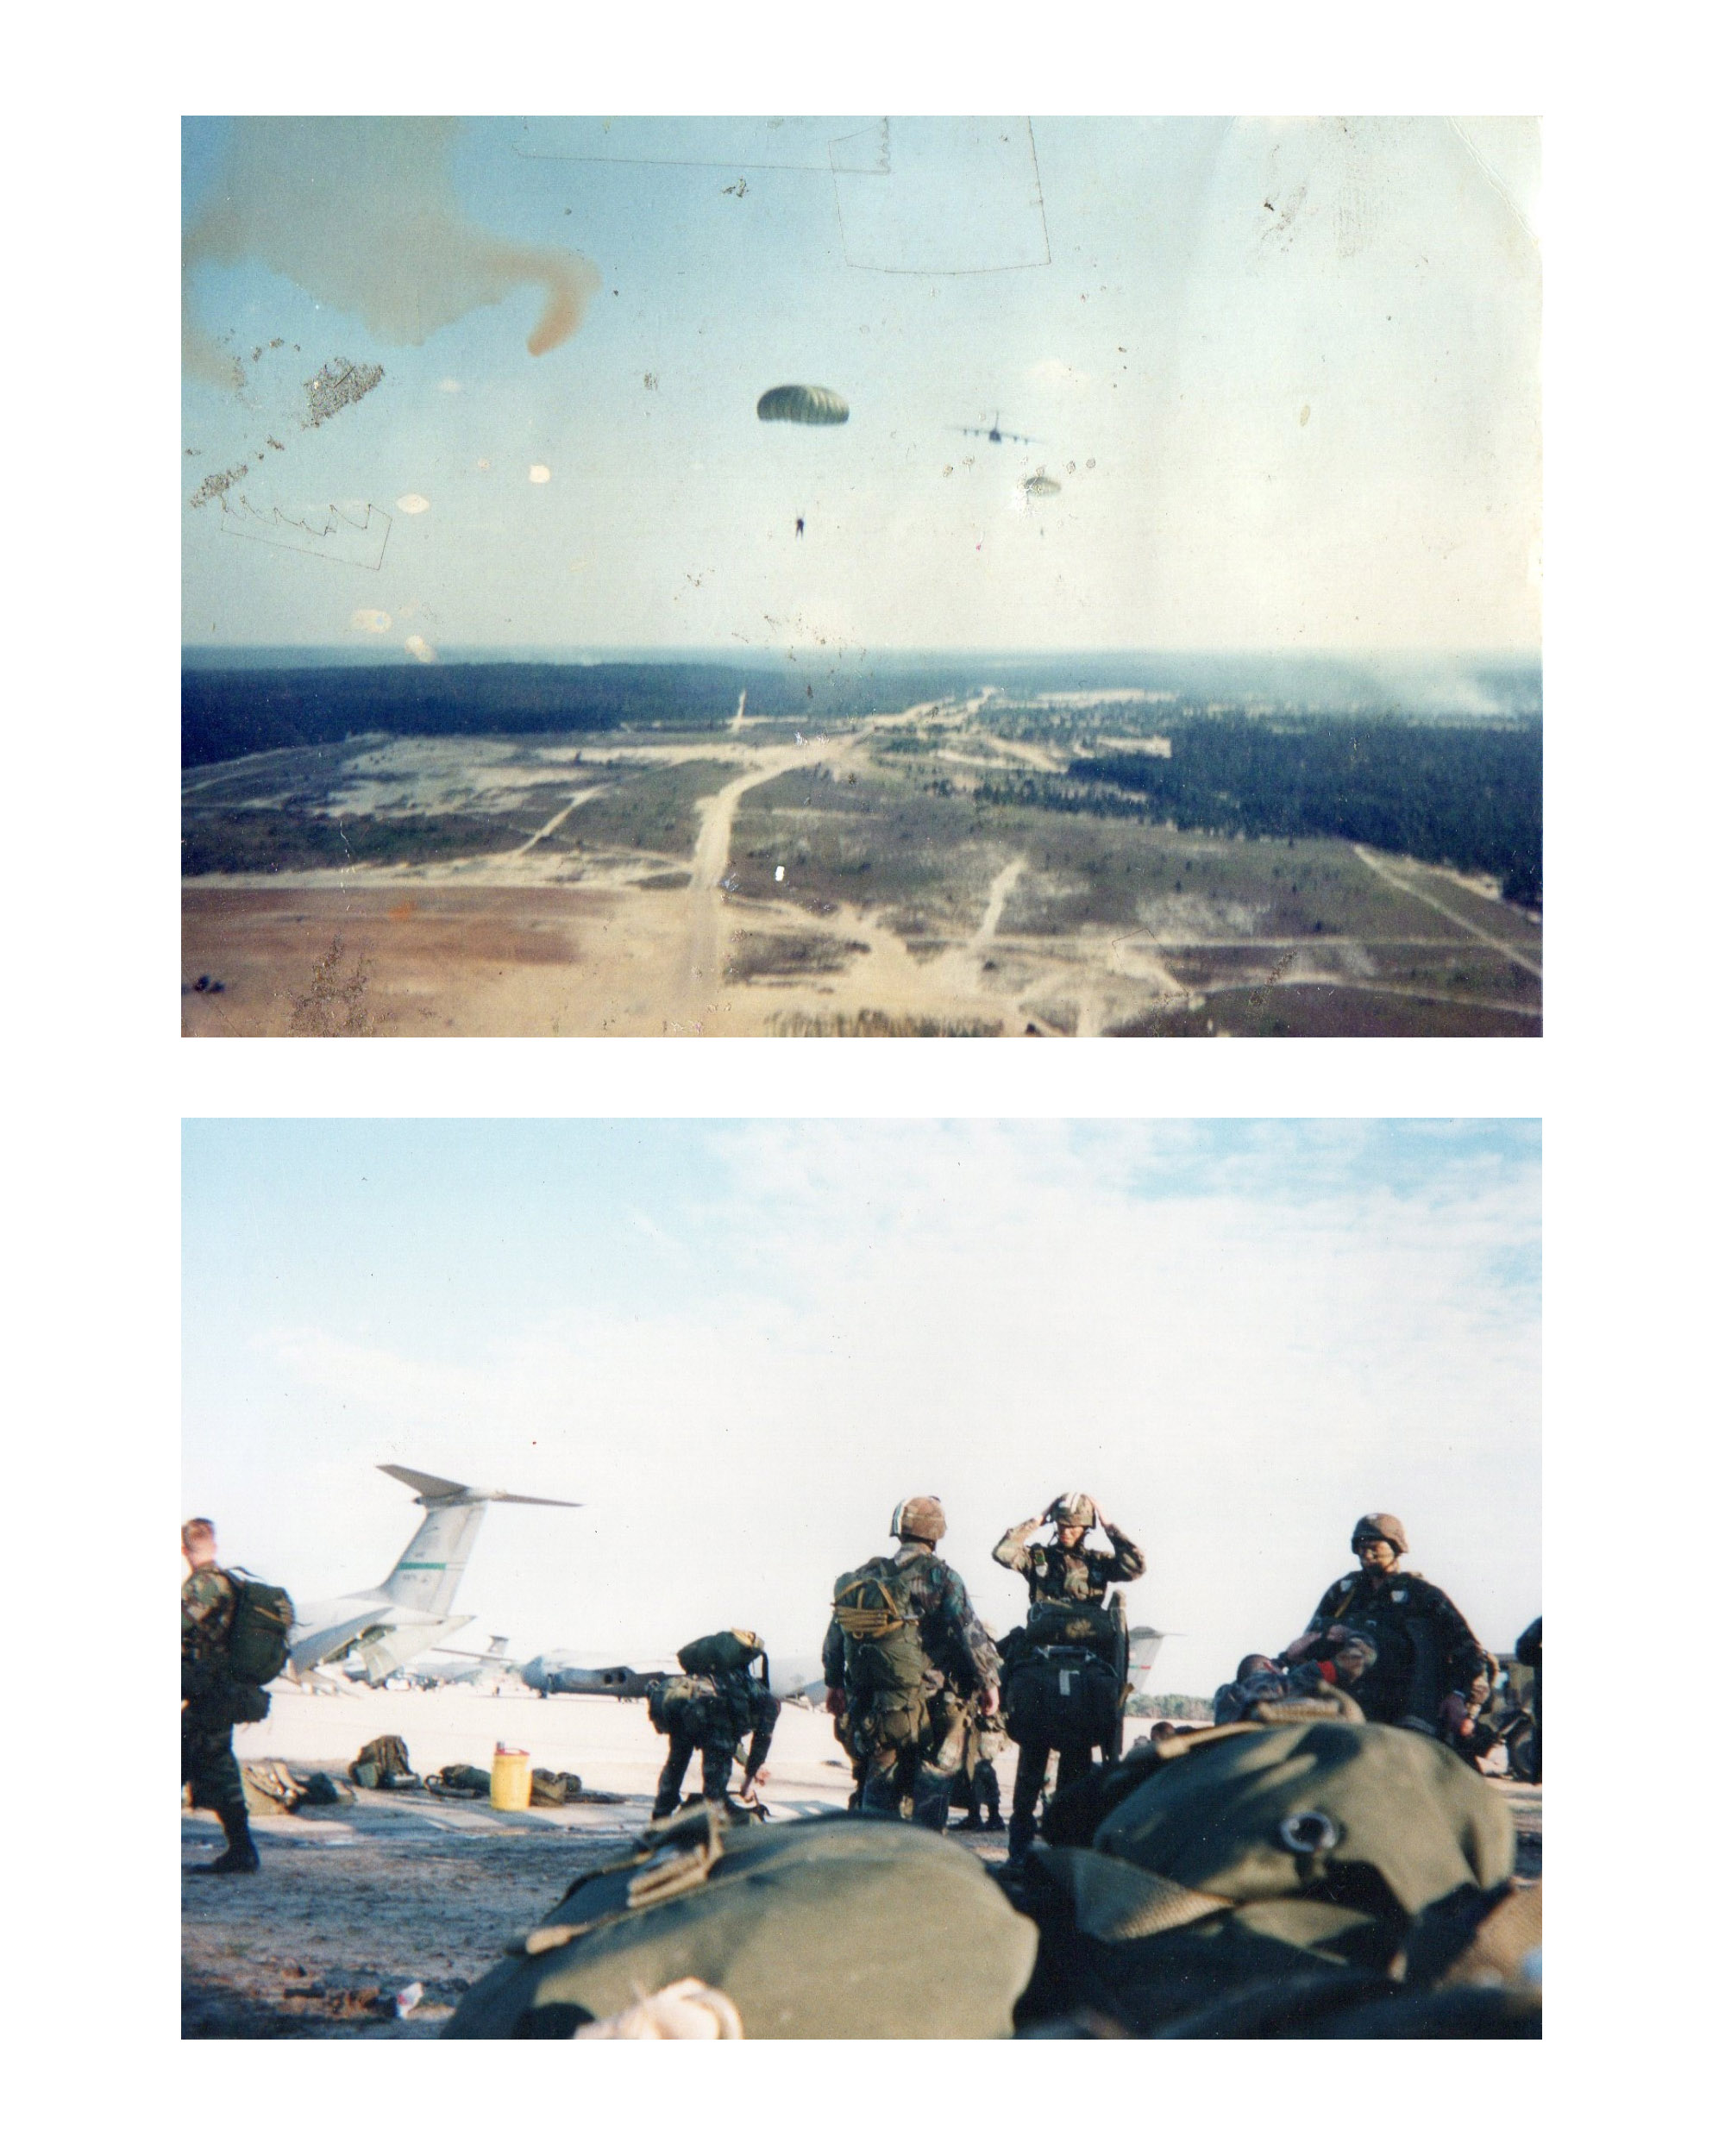 Above, mid-jump, taken with a disposable camera. Below, Preparing for a jump with the 82nd Airborne at Fort Bragg, NC. Images courtesy of Hector Barajas.